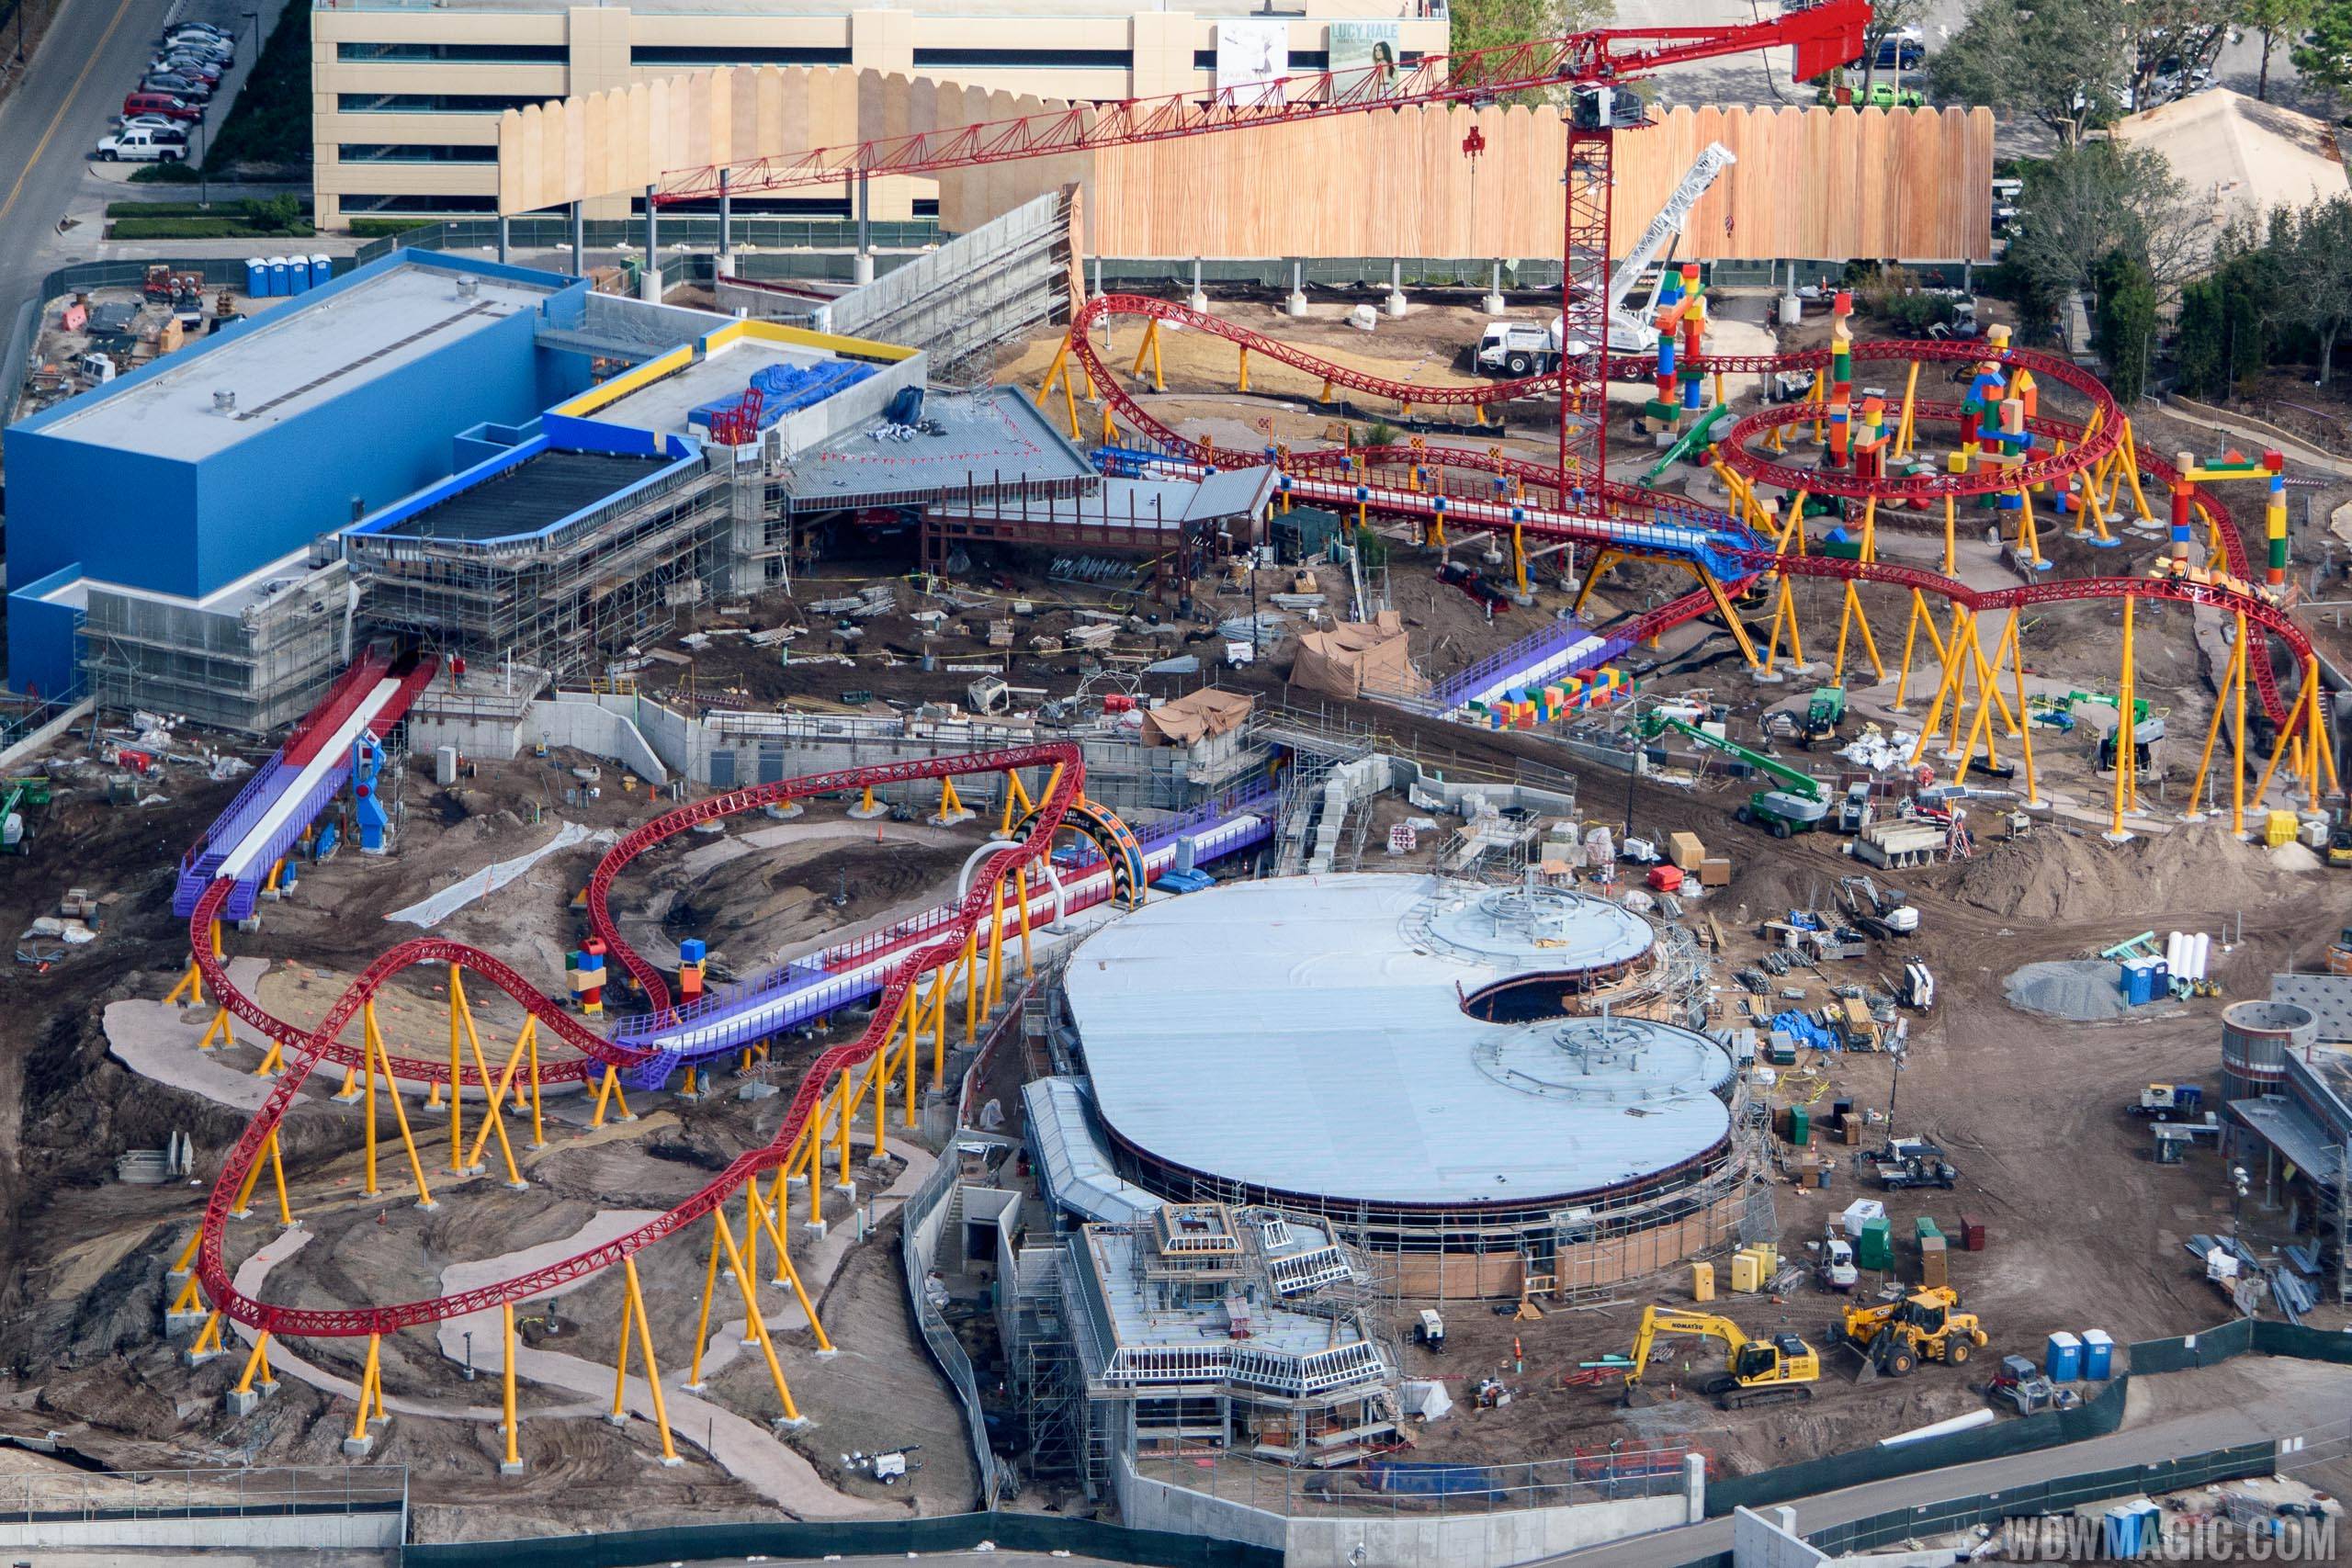 PHOTOS - Toy Story Land construction from the air